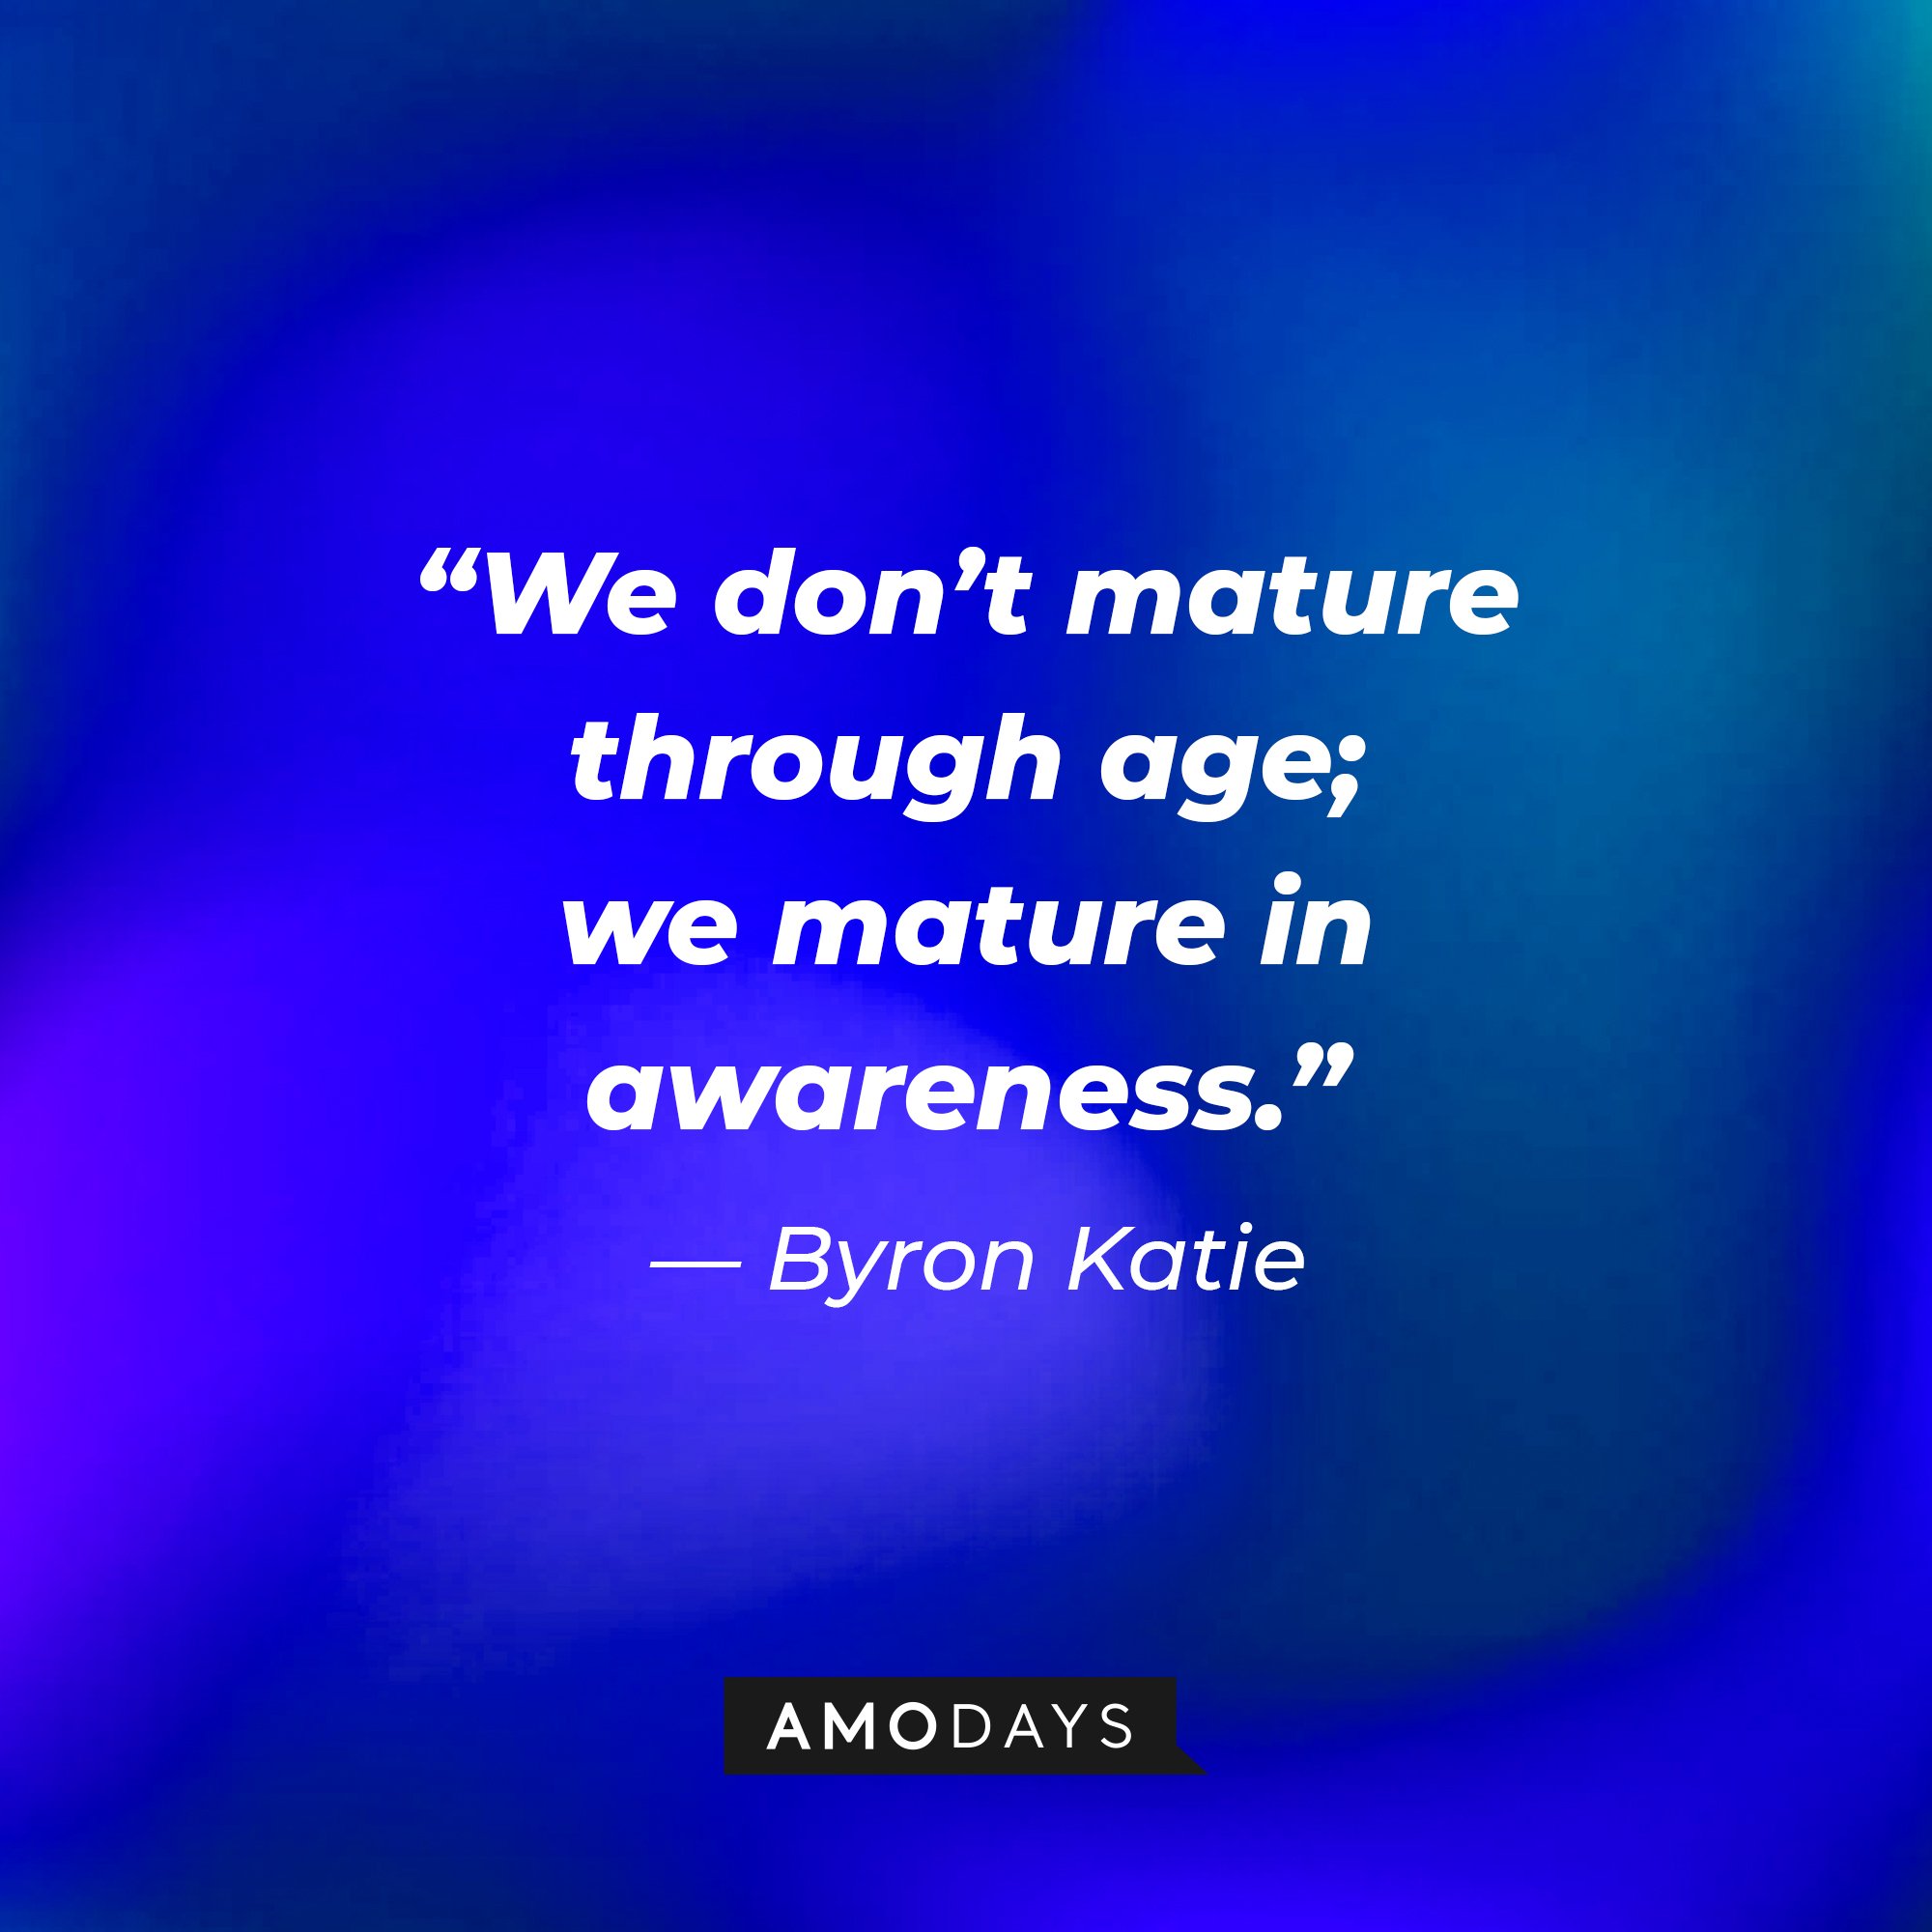 Byron Katie's quote: “We don’t mature through age; we mature in awareness.” | Image: AmoDays